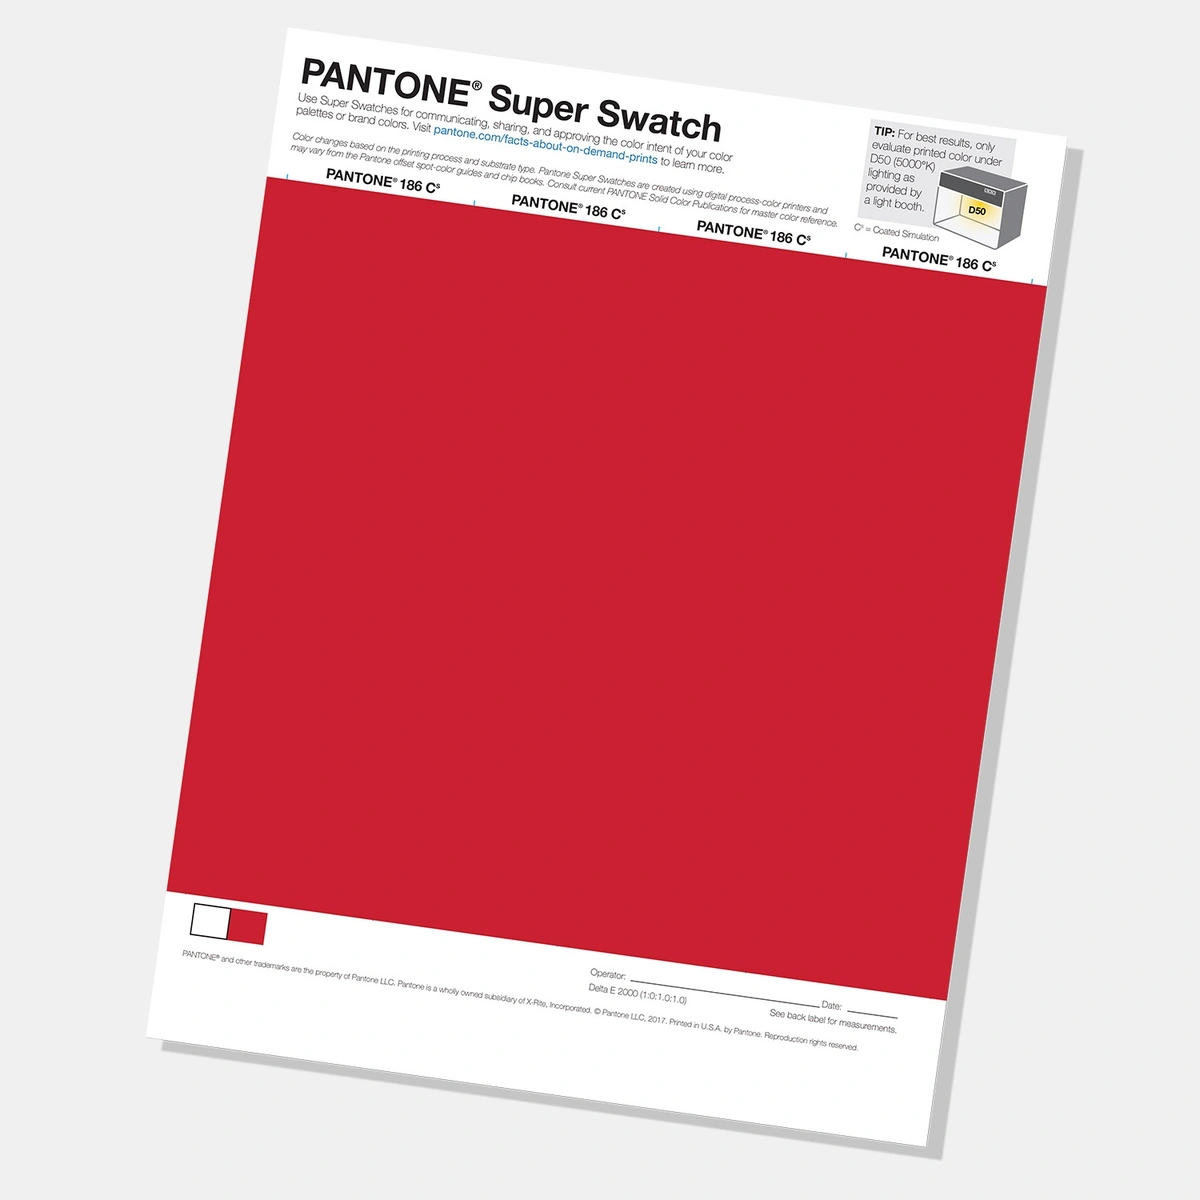 graphical-activity-pantone-graphics-super-swatch-product-1